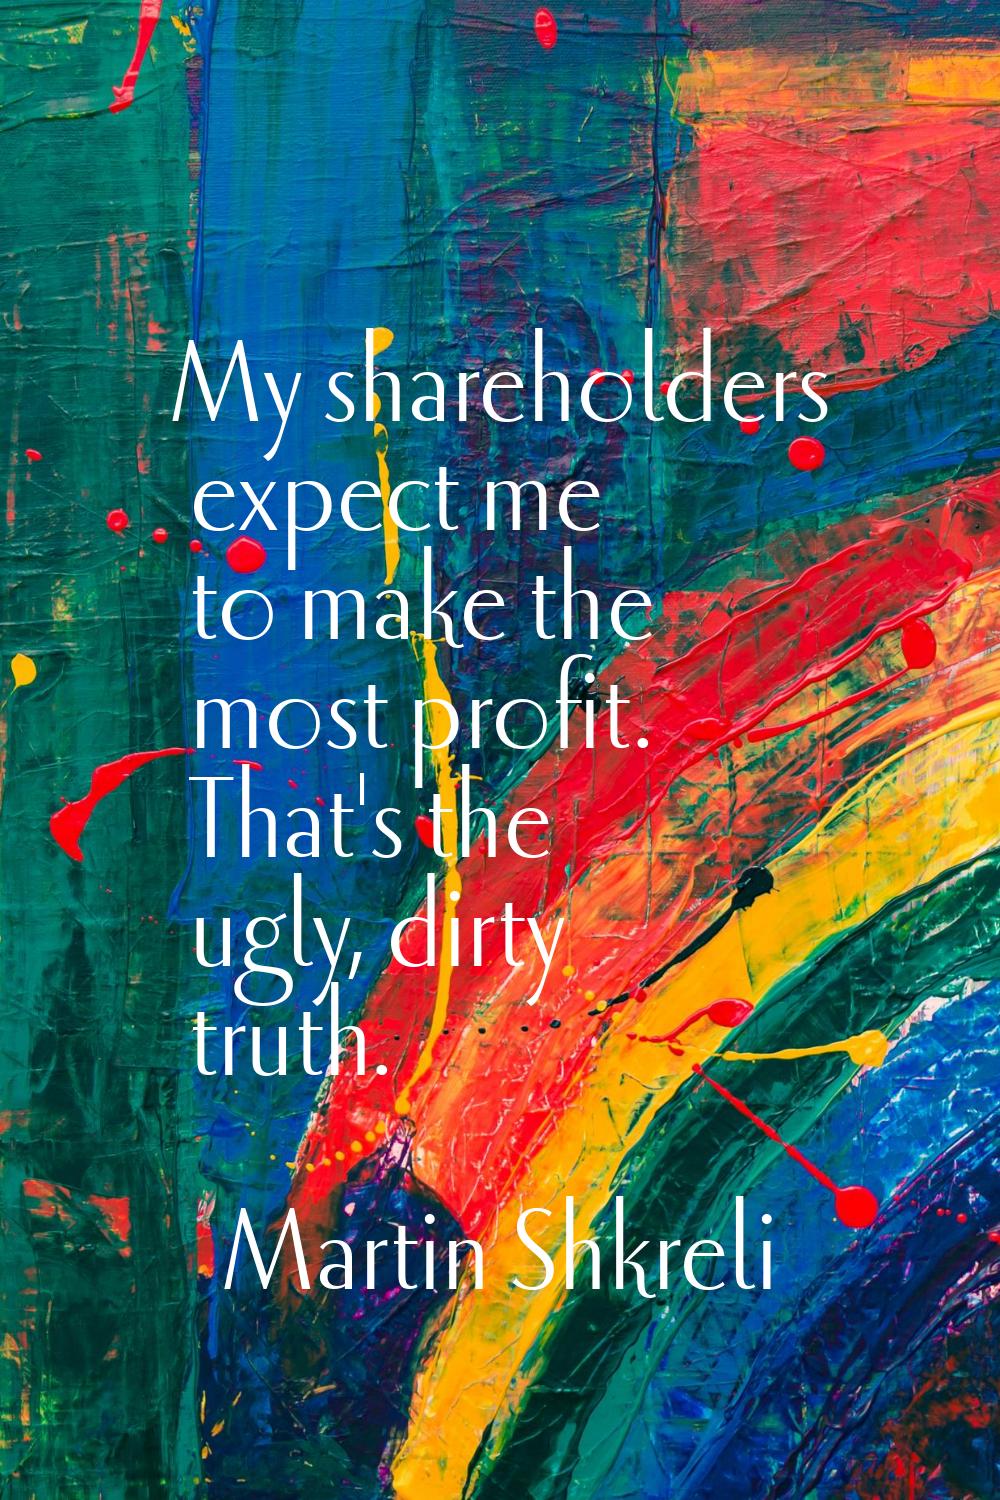 My shareholders expect me to make the most profit. That's the ugly, dirty truth.